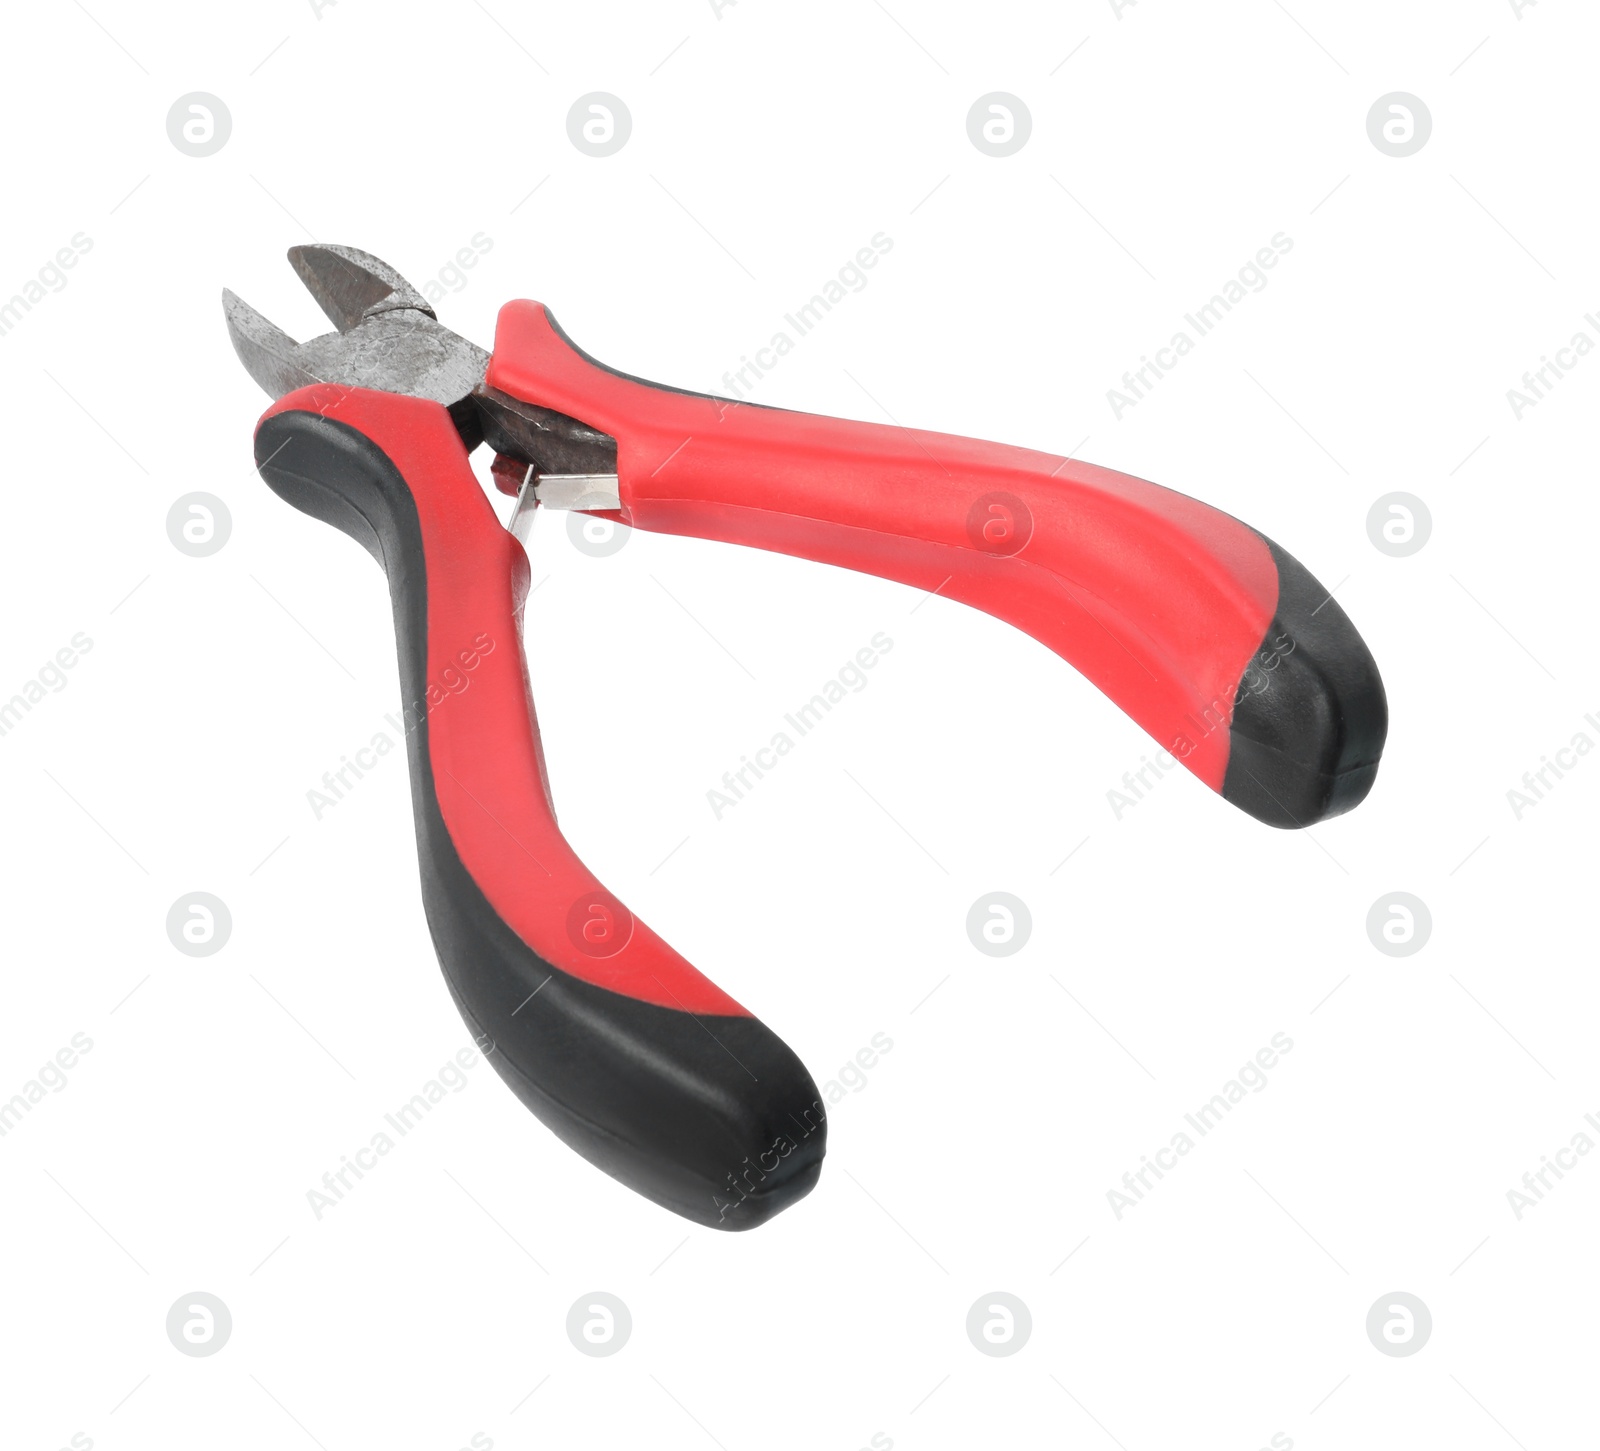 Photo of New side cutting pliers isolated on white